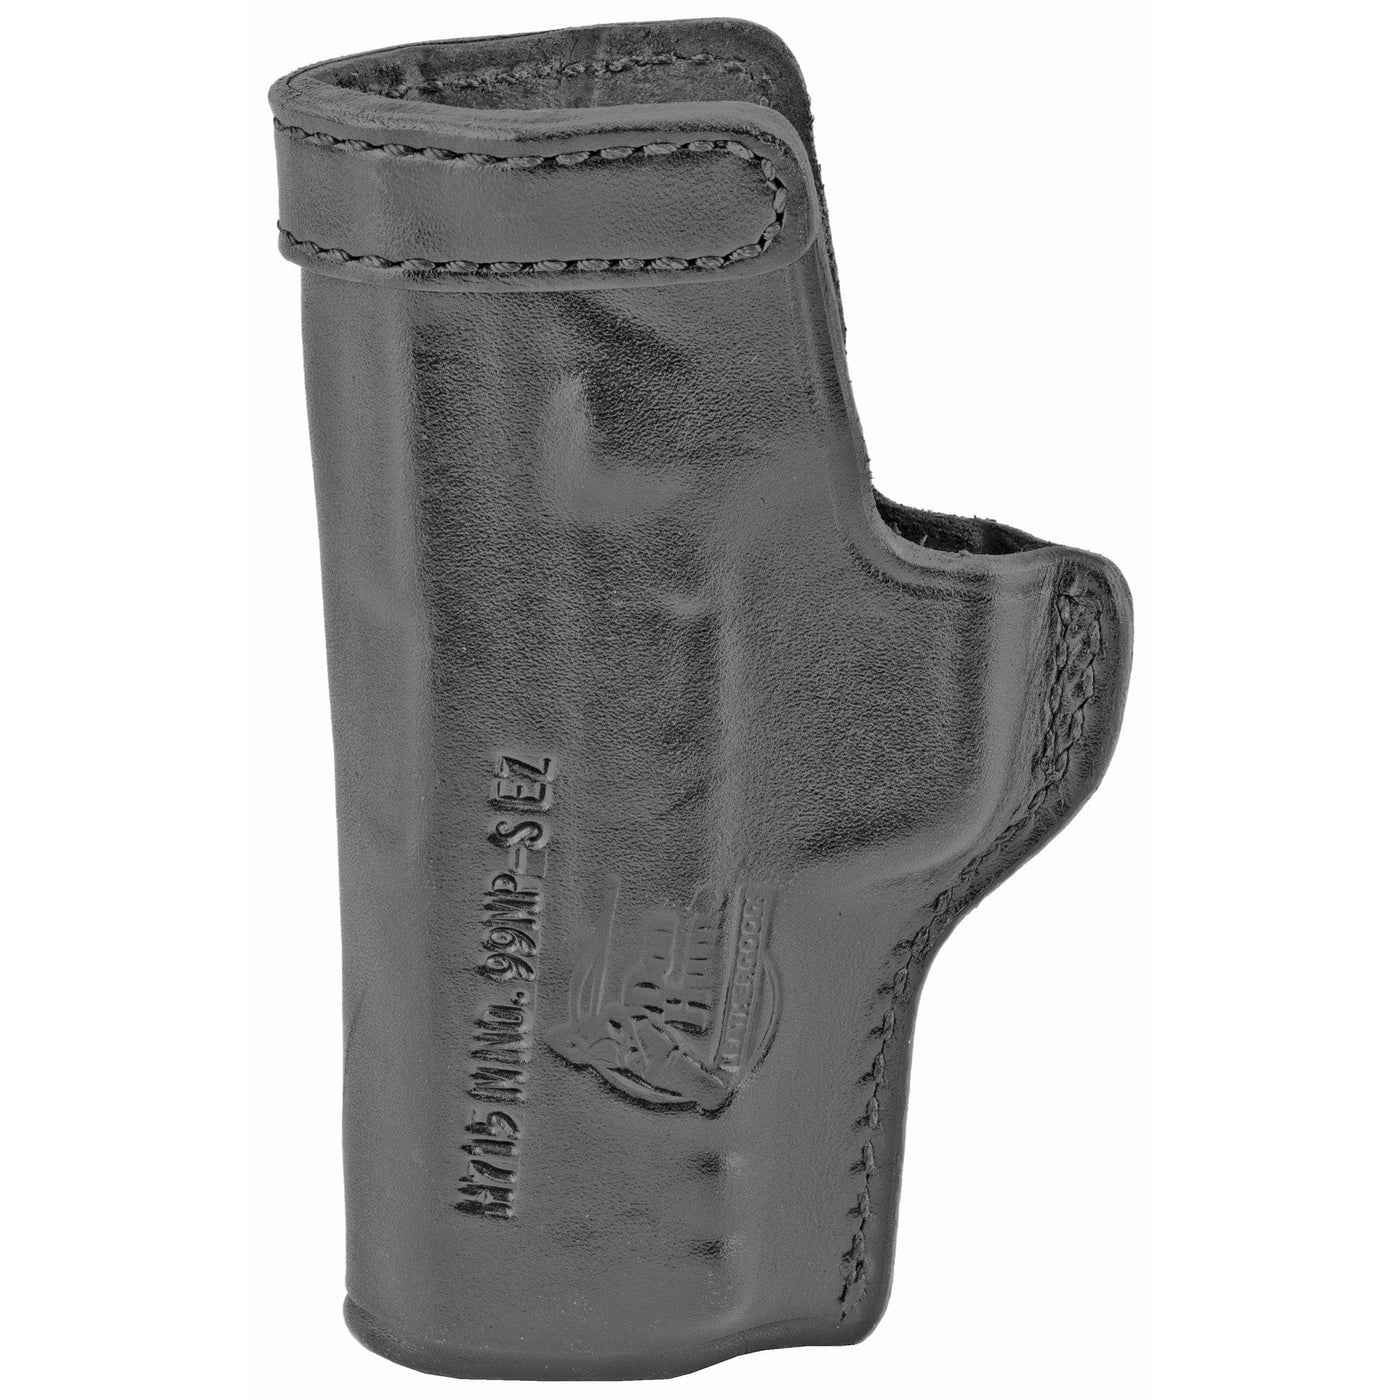 Don Hume D Hume H715-m Sw Mp 9 Shld Ez Rh Black Holsters